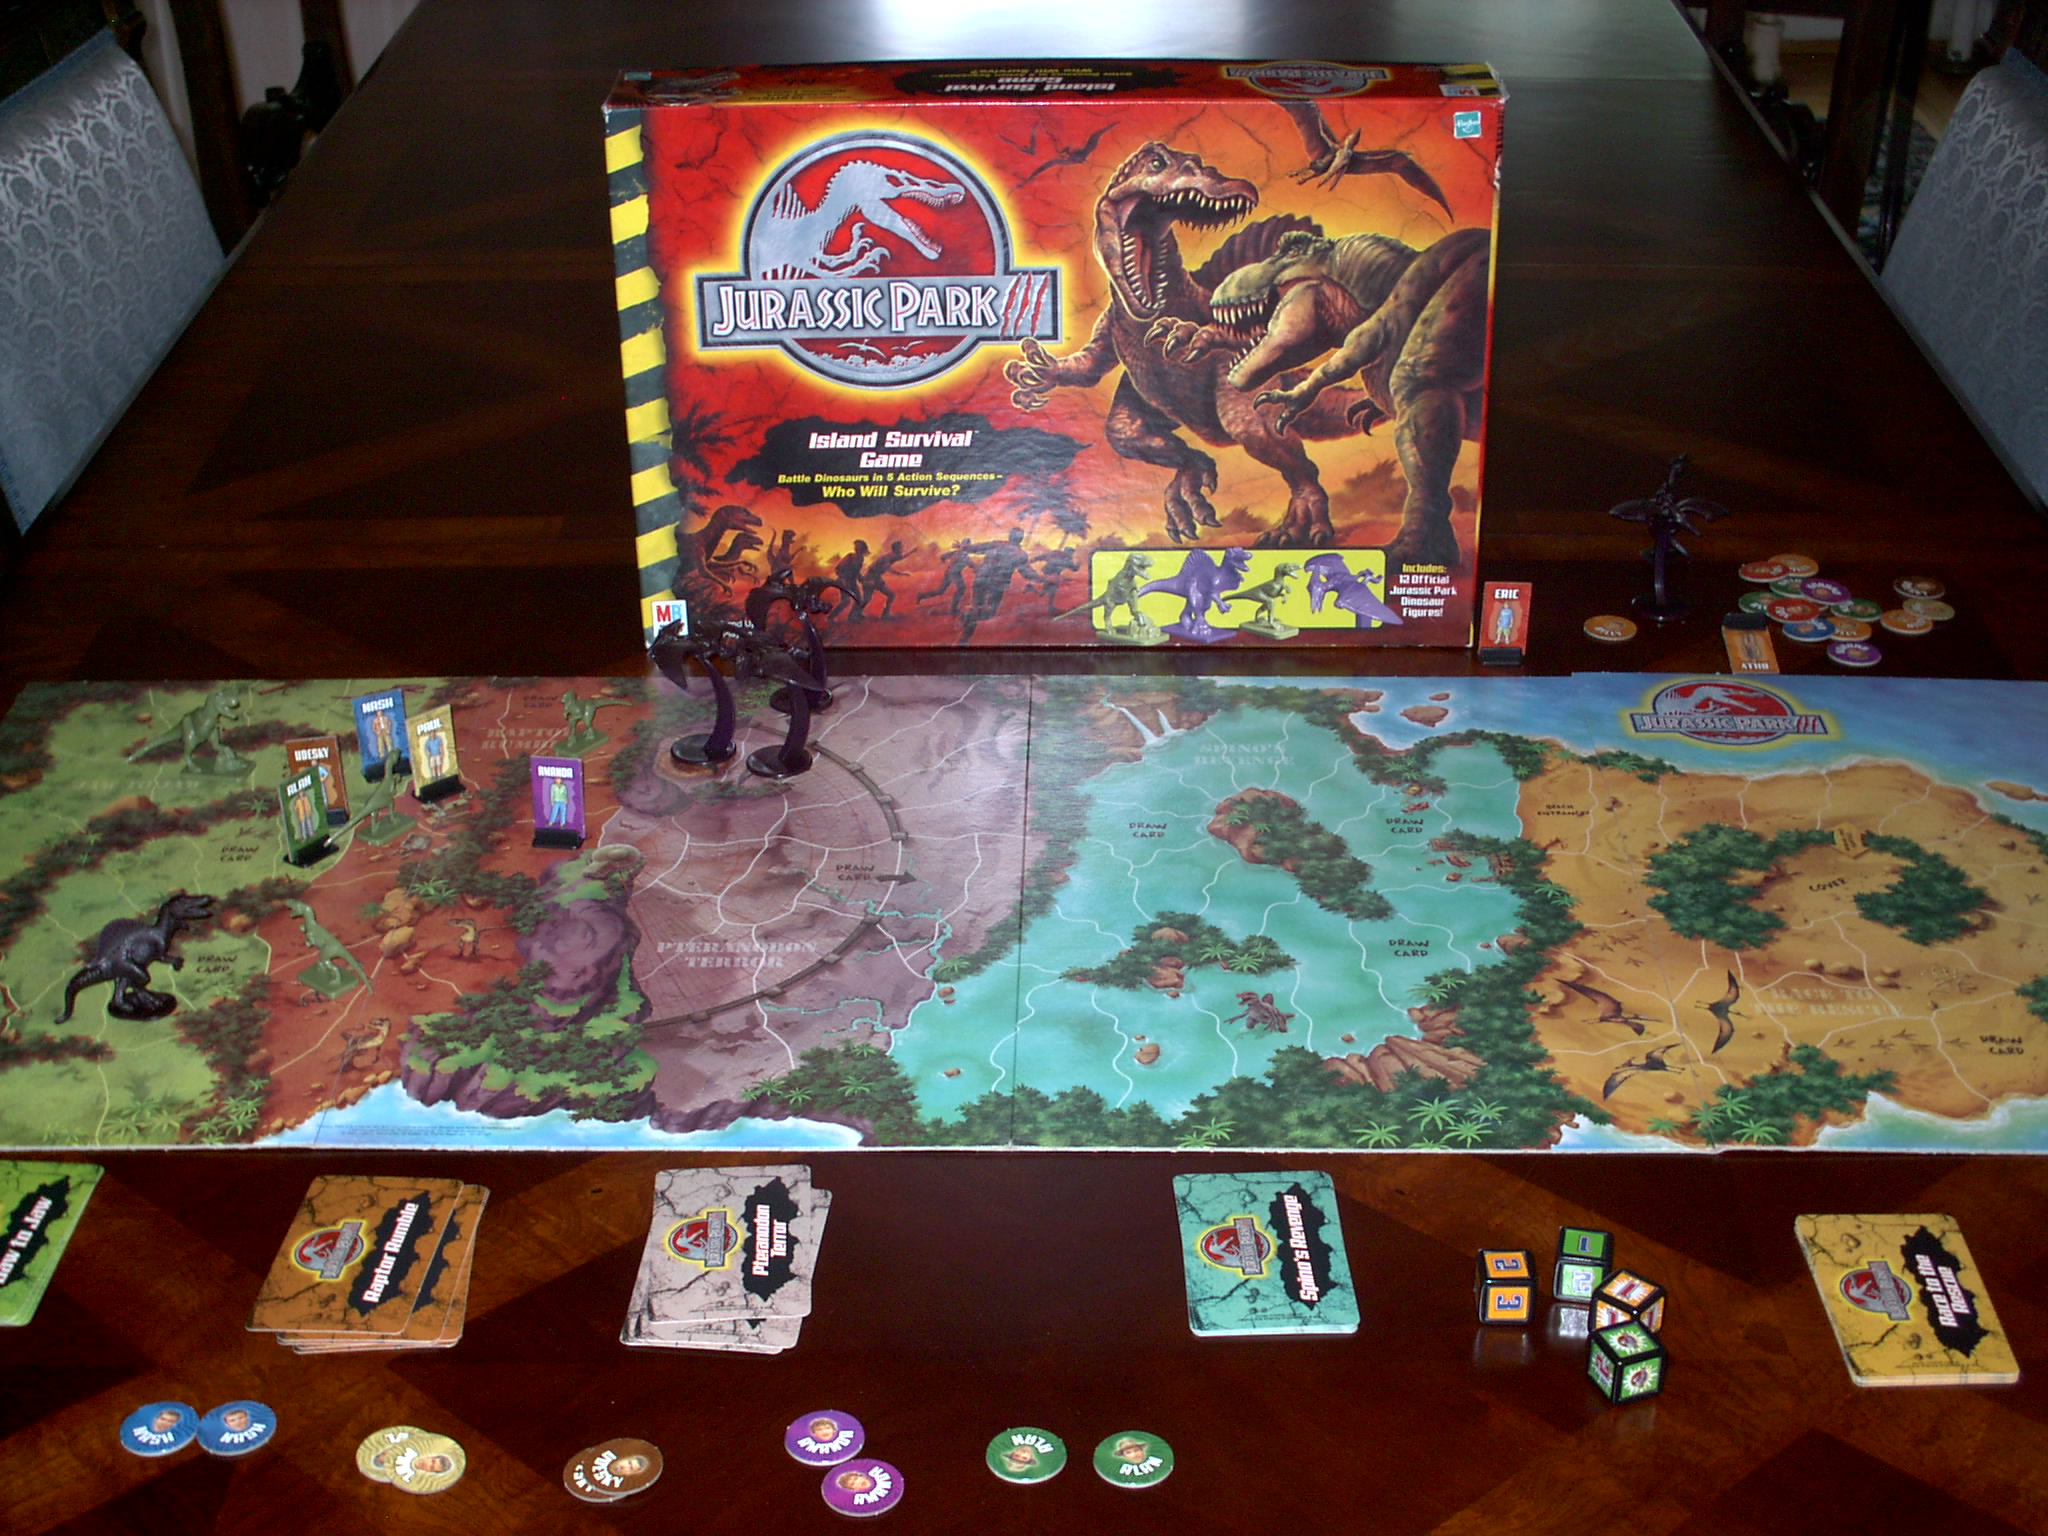 Jurassic Park III Island Survival Board Game Replacement Parts & Pieces 2001 